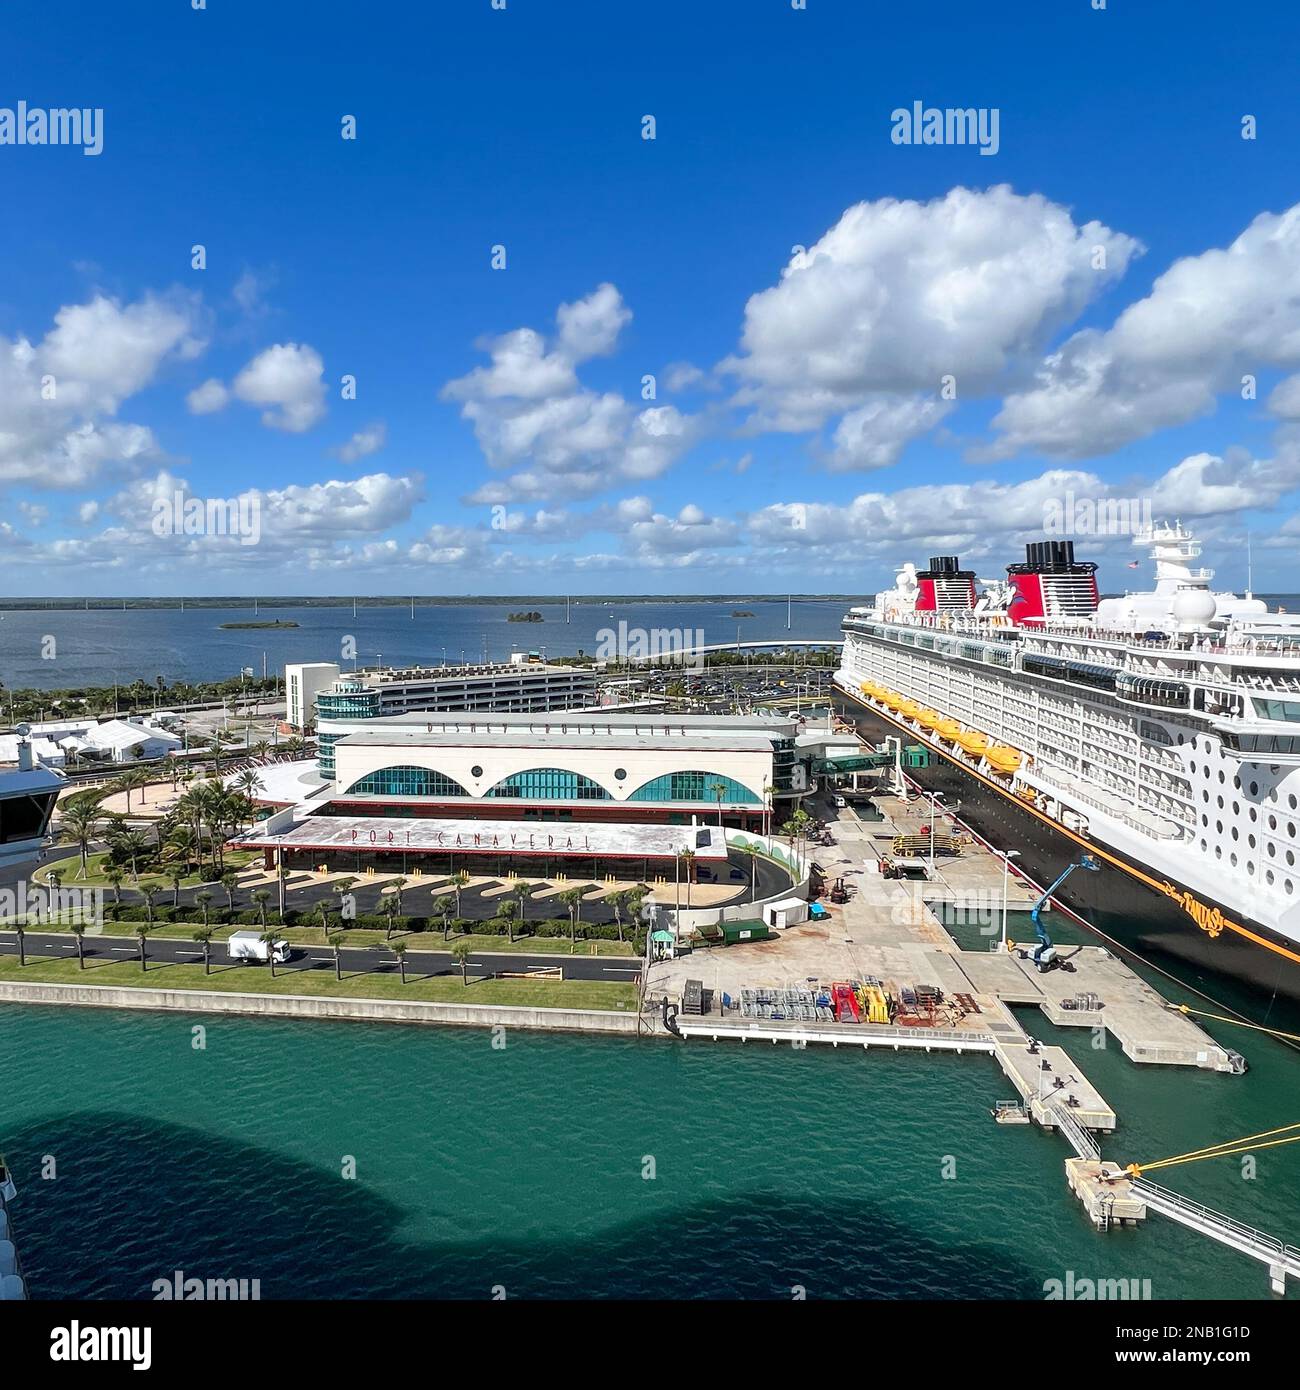 Orlando, FL USA - January 8, 2022:  The Disney Cruise line building and cruise ship Fantasy at dock in Port Canaveral, Florida. Stock Photo